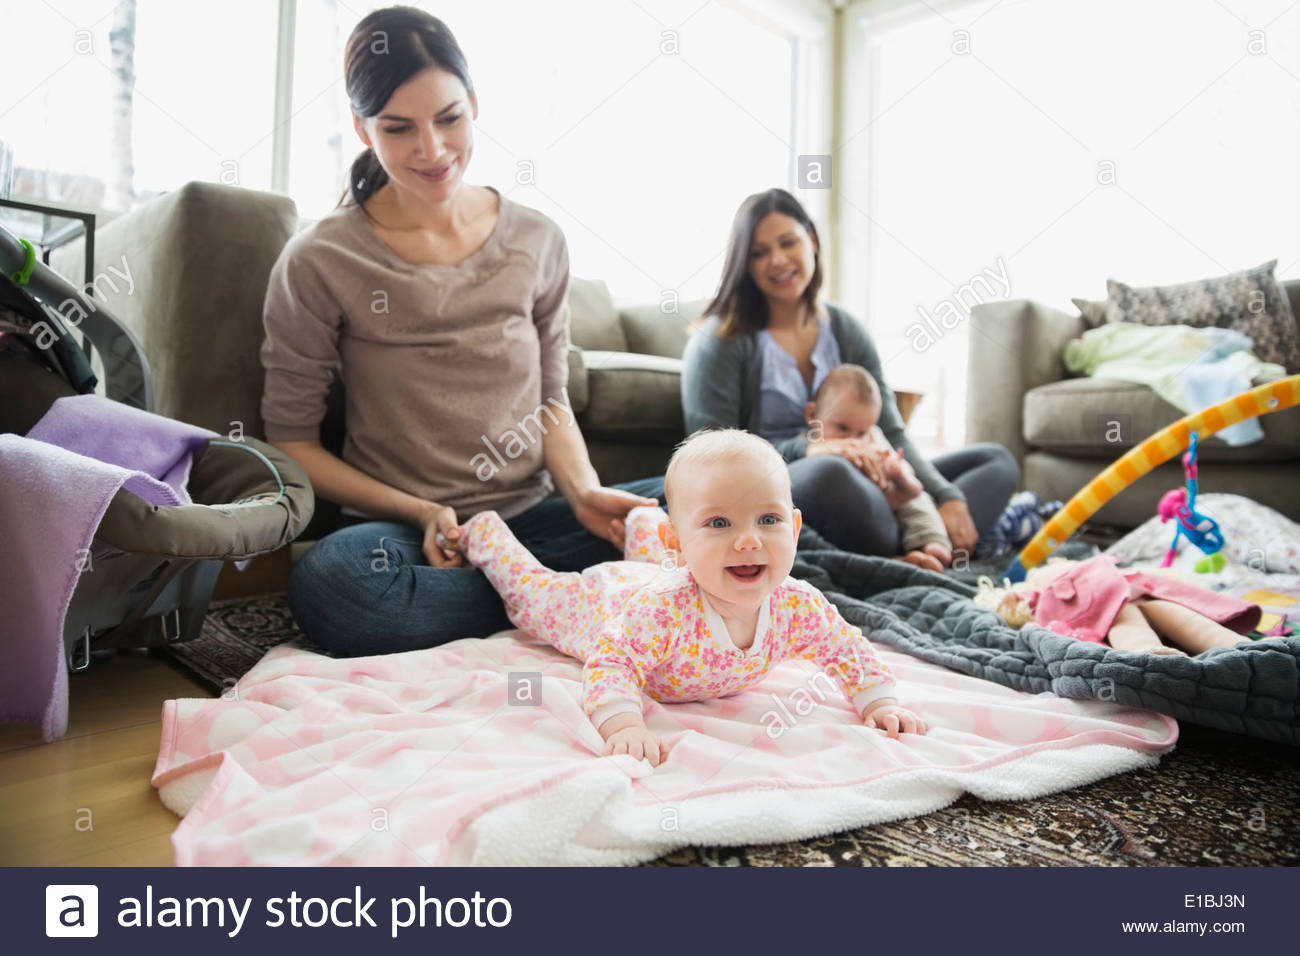 Mothers and babies in living room Stock Photo